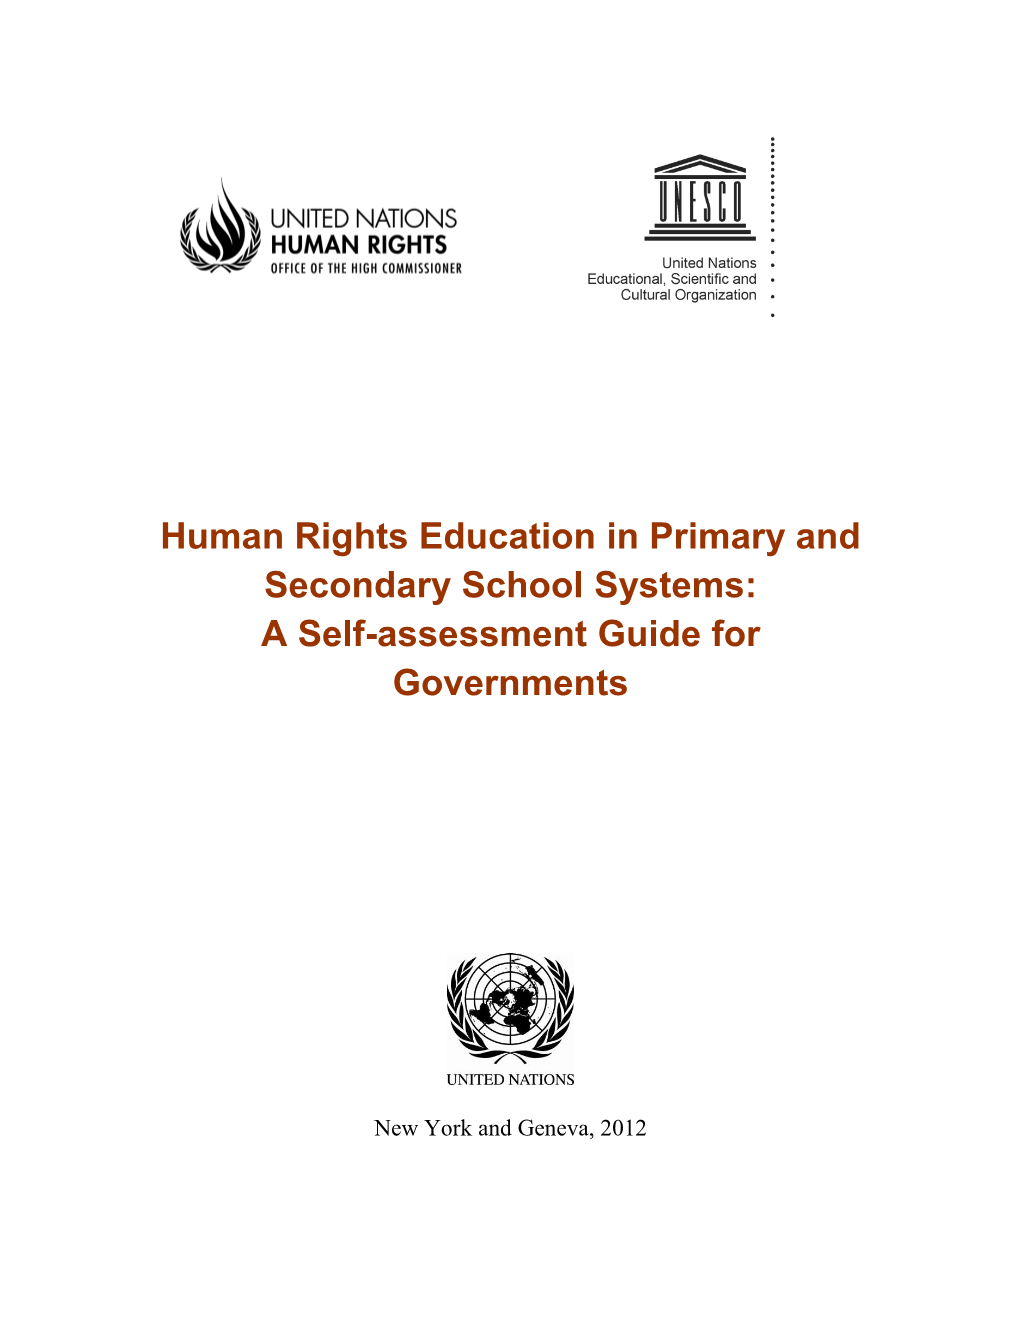 Human Rights Education in Primary and Secondary School Systems: a Self-Assessment Guide for Governments